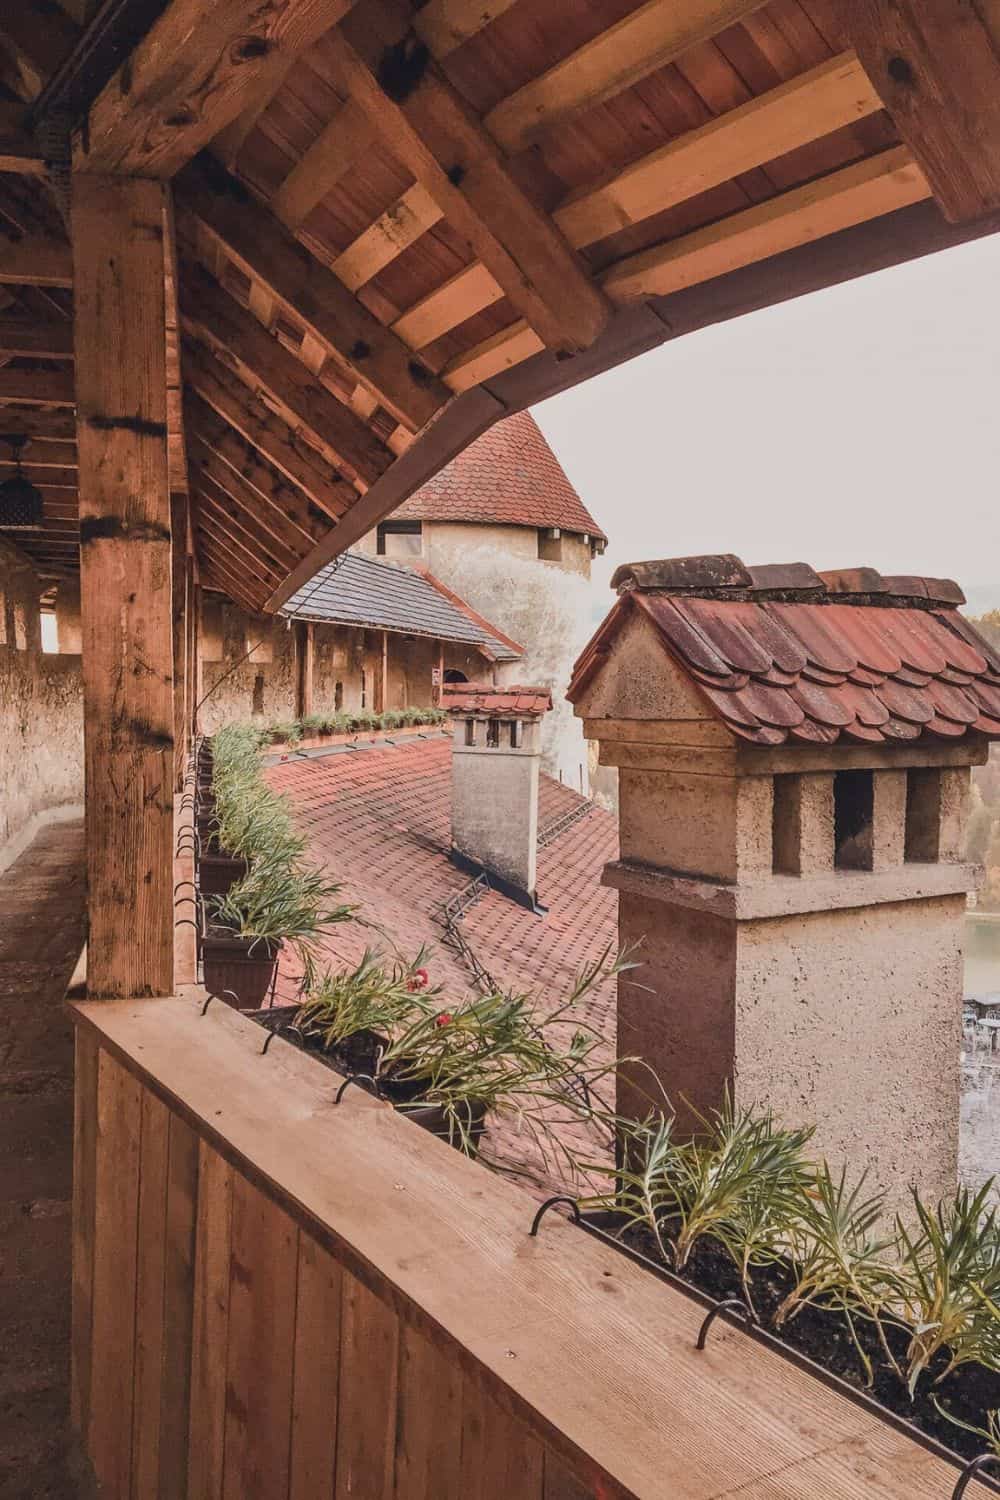 View from a wooden walkway within a castle, with wooden beams overhead and a traditional clay tile roof visible. Plants line the walkway's edge, and in the distance, a round castle tower looms against a pale sky. The architecture suggests a blend of functionality and ancient charm, typical of a medieval fortress.